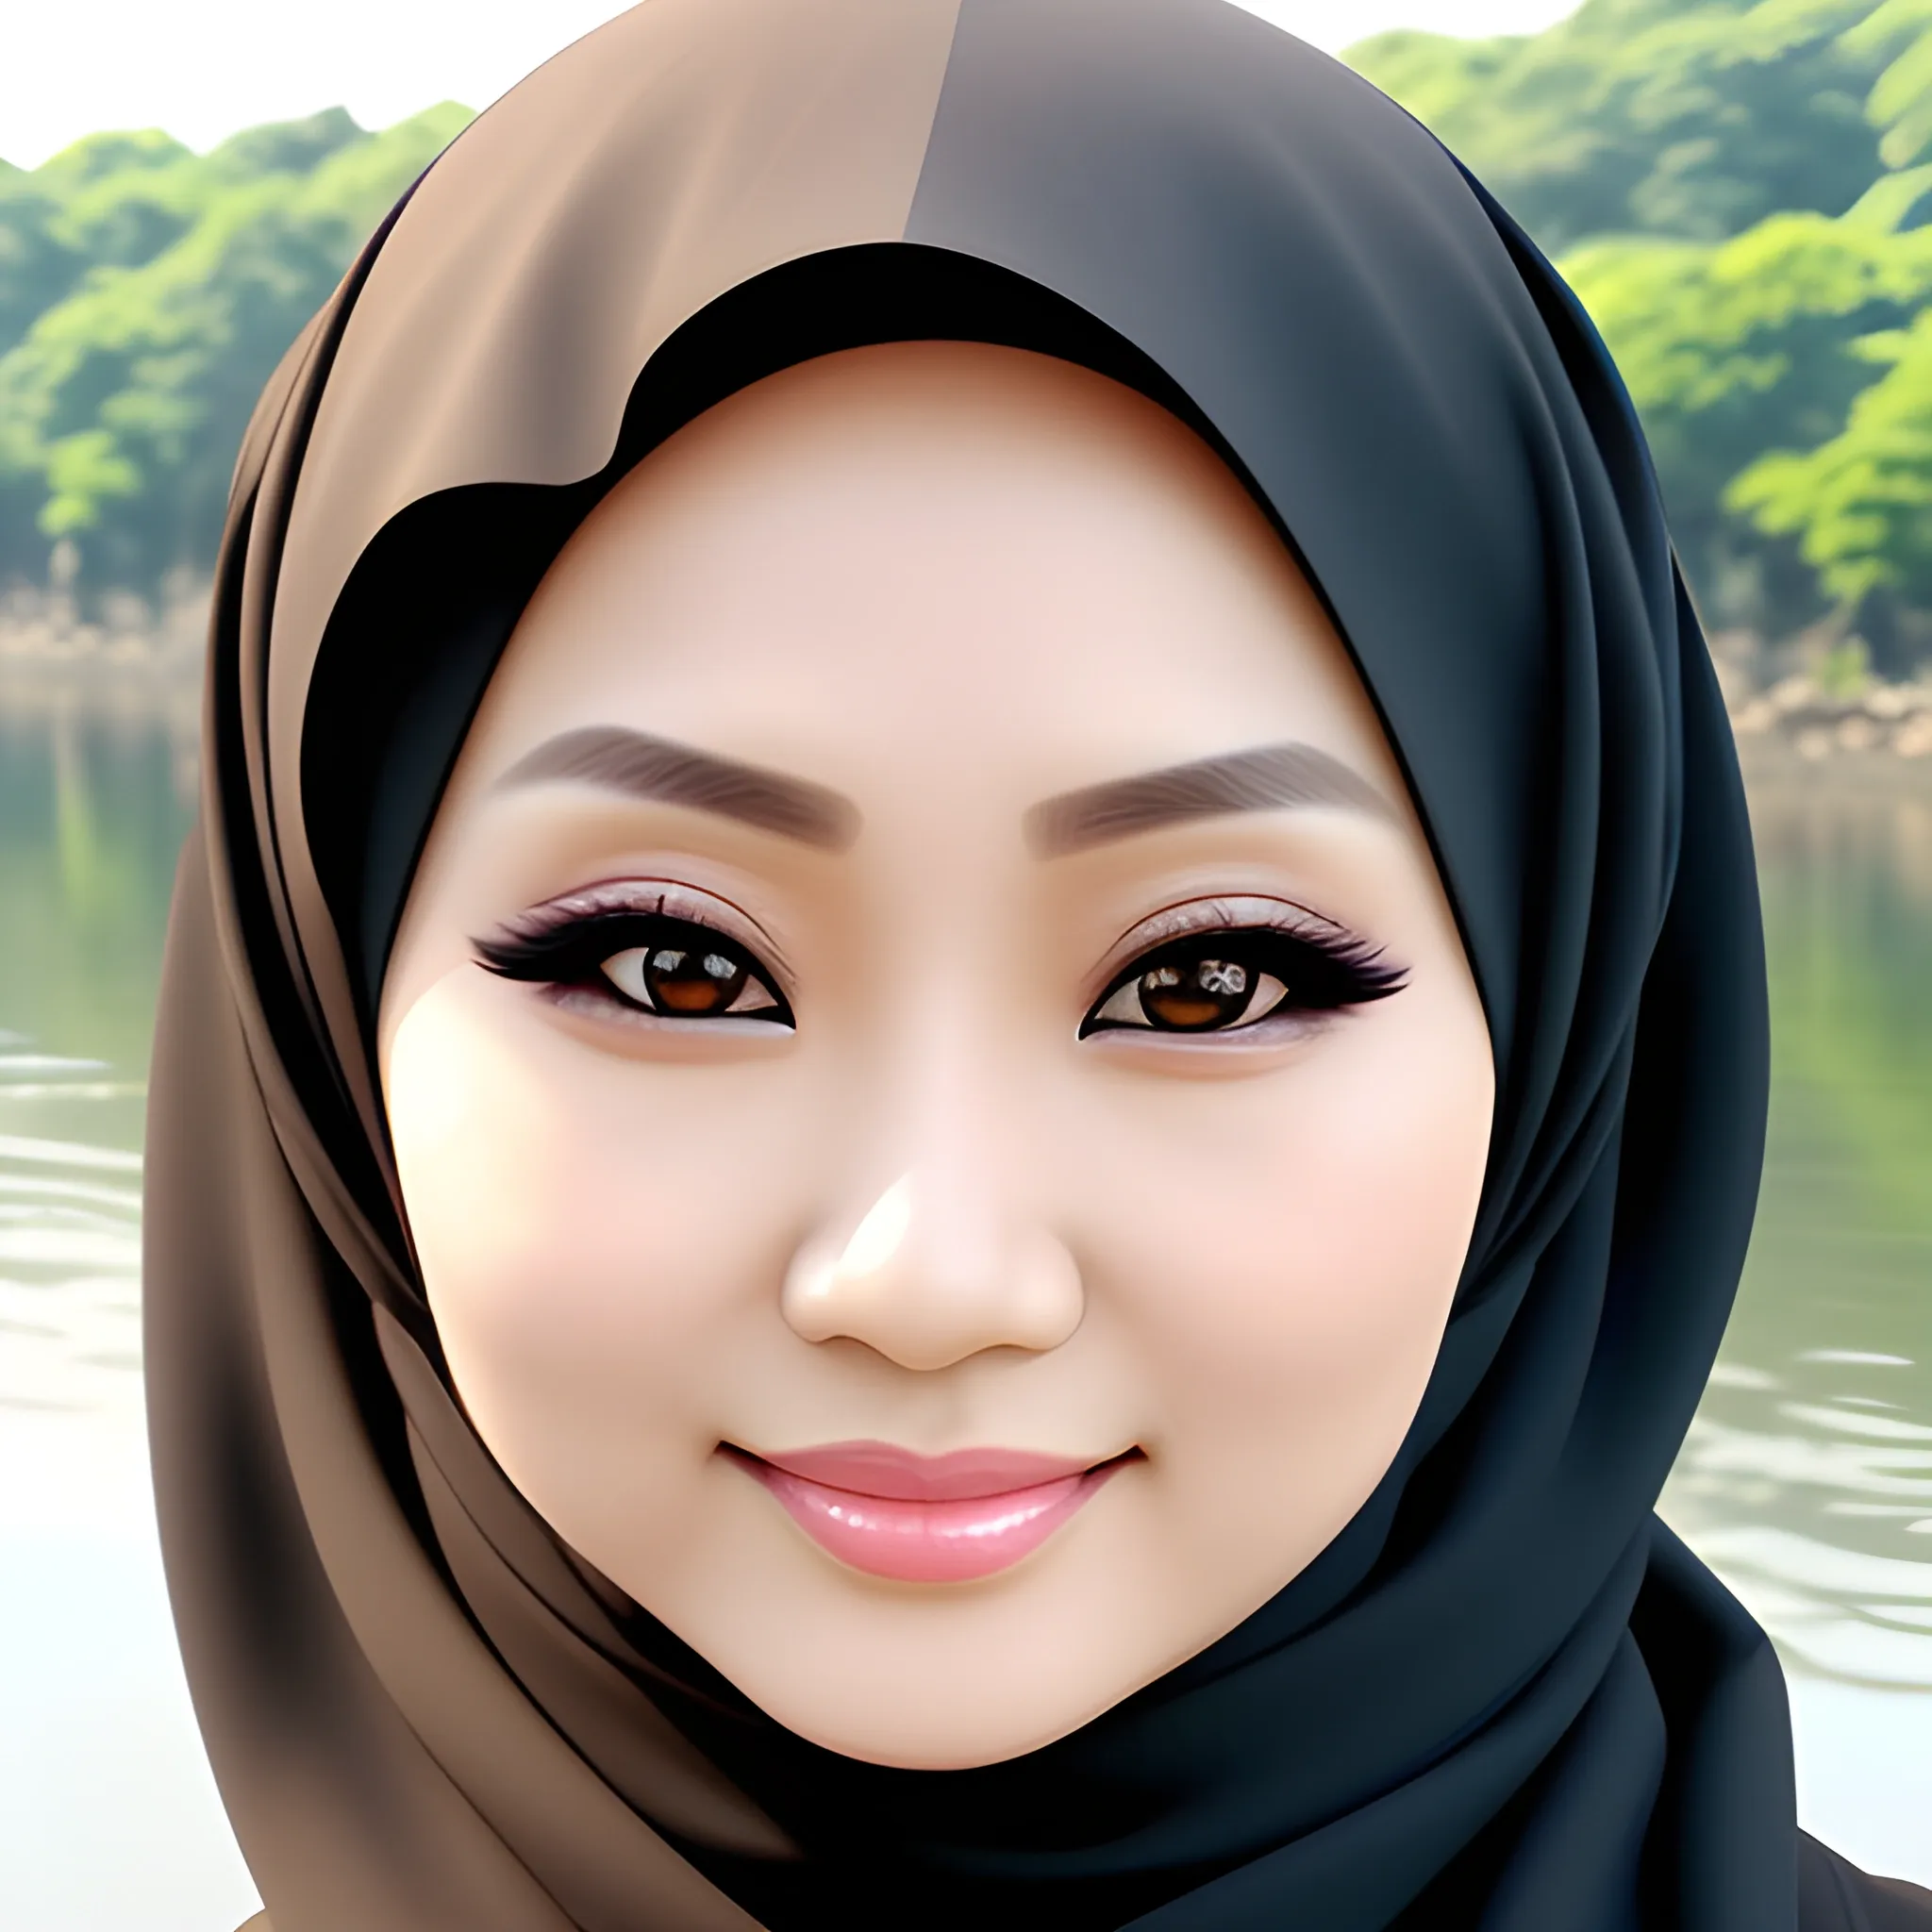 pretty women indonesian, elegant, happy, face detail, sharp nose, black eyes, wearing black hijab, white blouse casual, above the river, her eyes gazing at camera, 4k